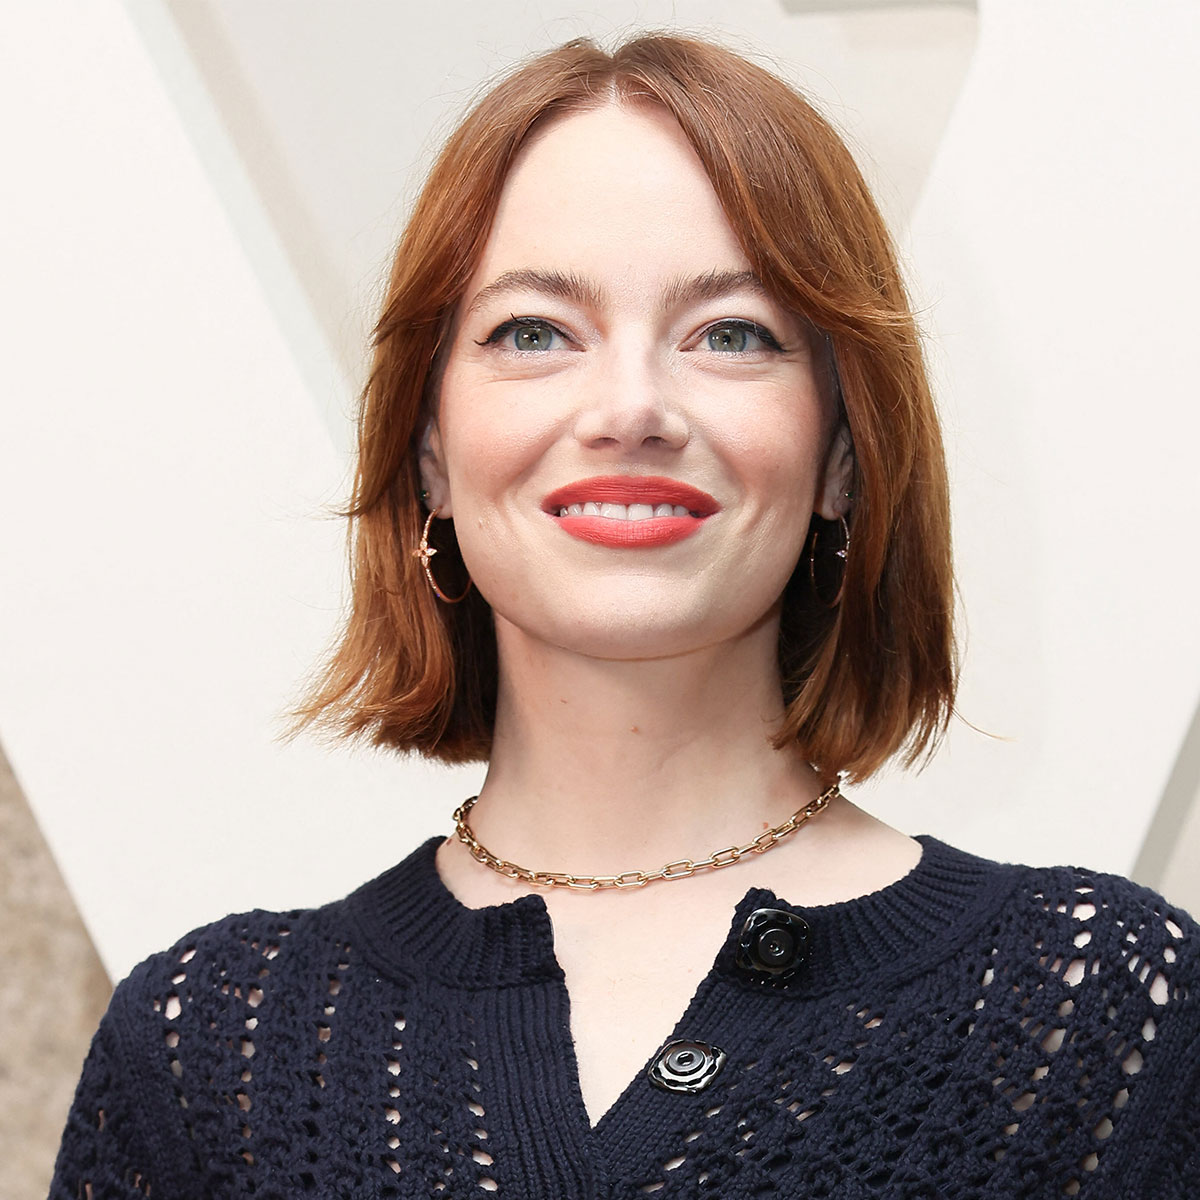 Emma Stone Shows Off Her Tiny Waist In Cinched, Elegant White